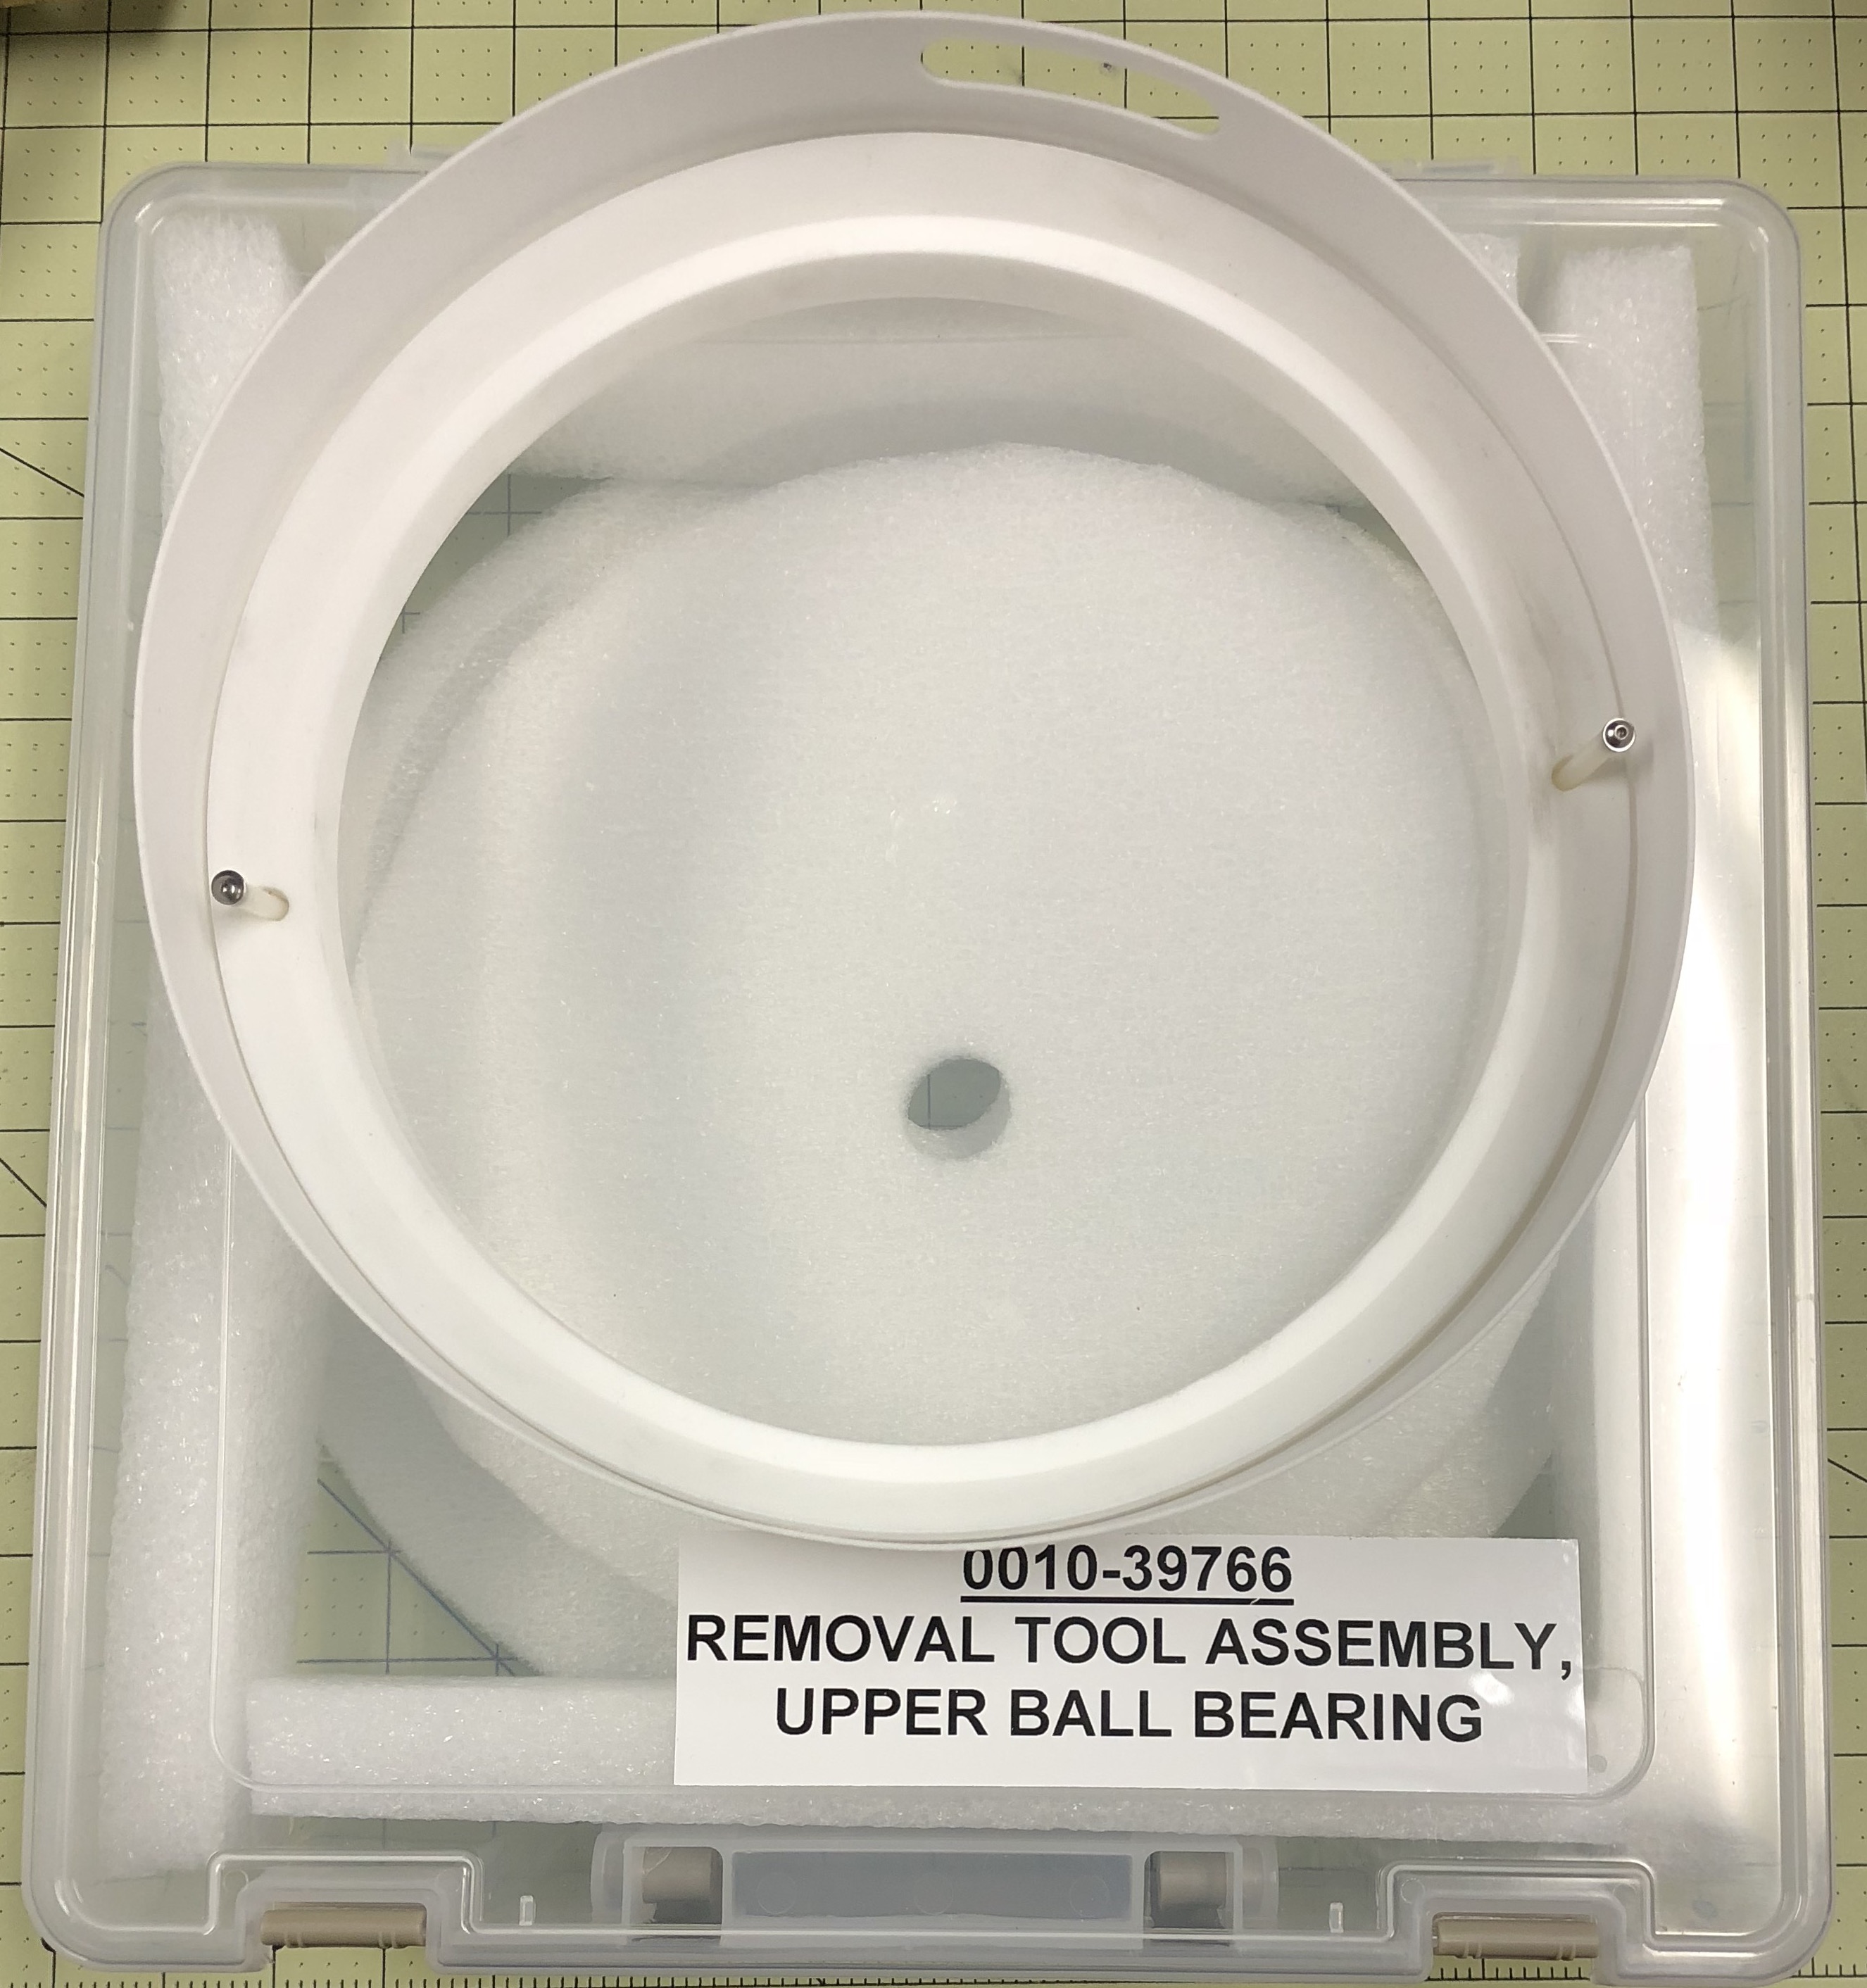 RTP UPPER BEARING REMOVAL TOOL